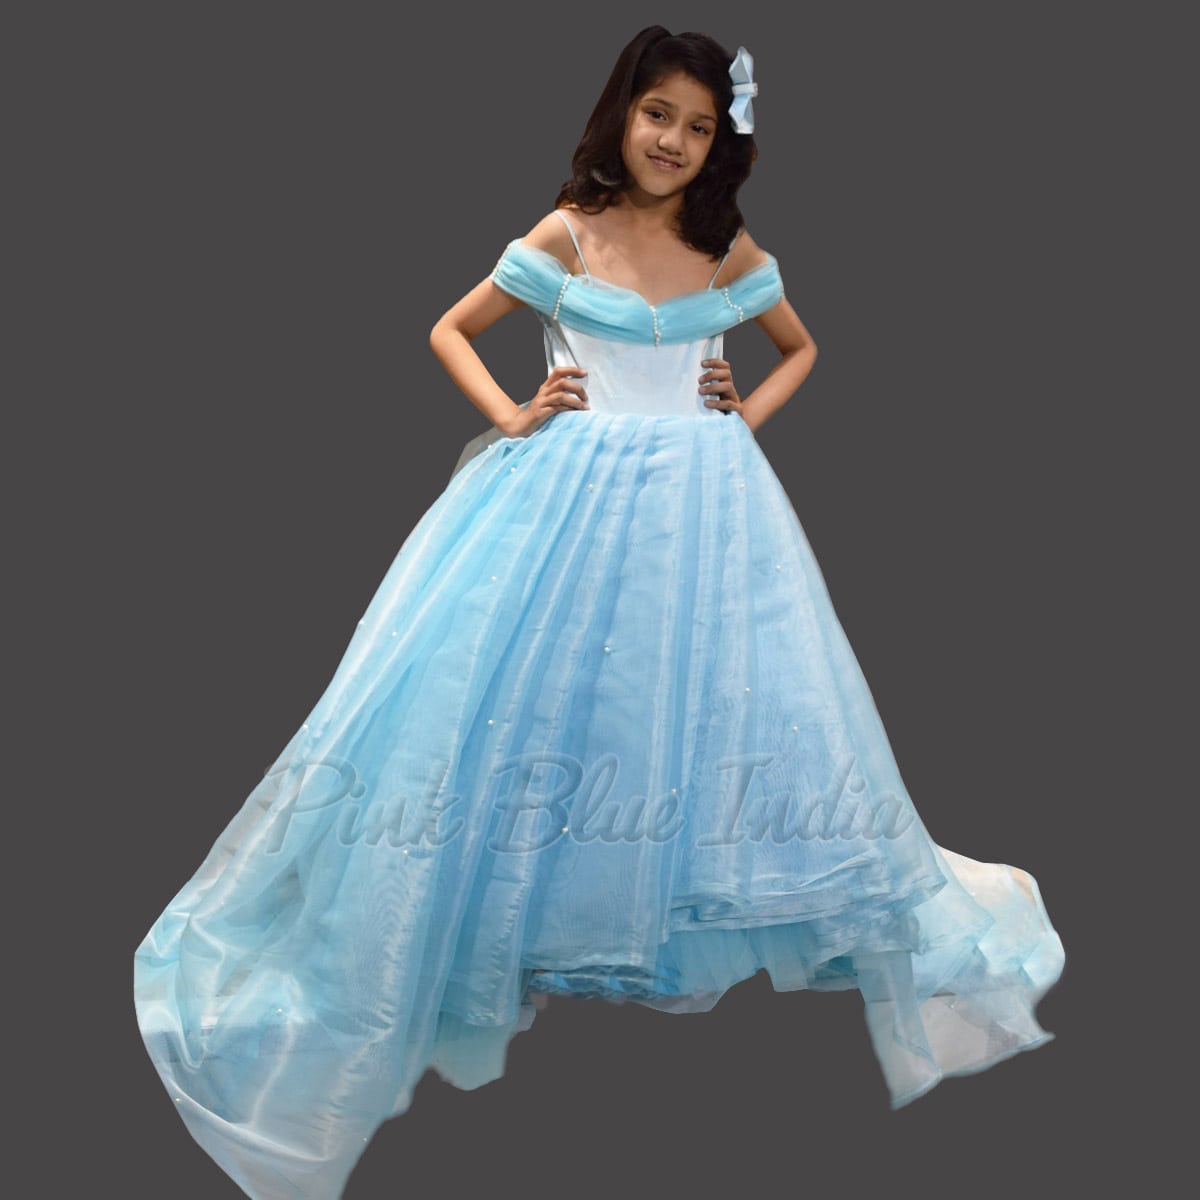 Buy Dressy Daisy Girls' Princess Cinderella Costume Princess Dress  Halloween Fancy Dress up Size 4T Online at Low Prices in India - Amazon.in